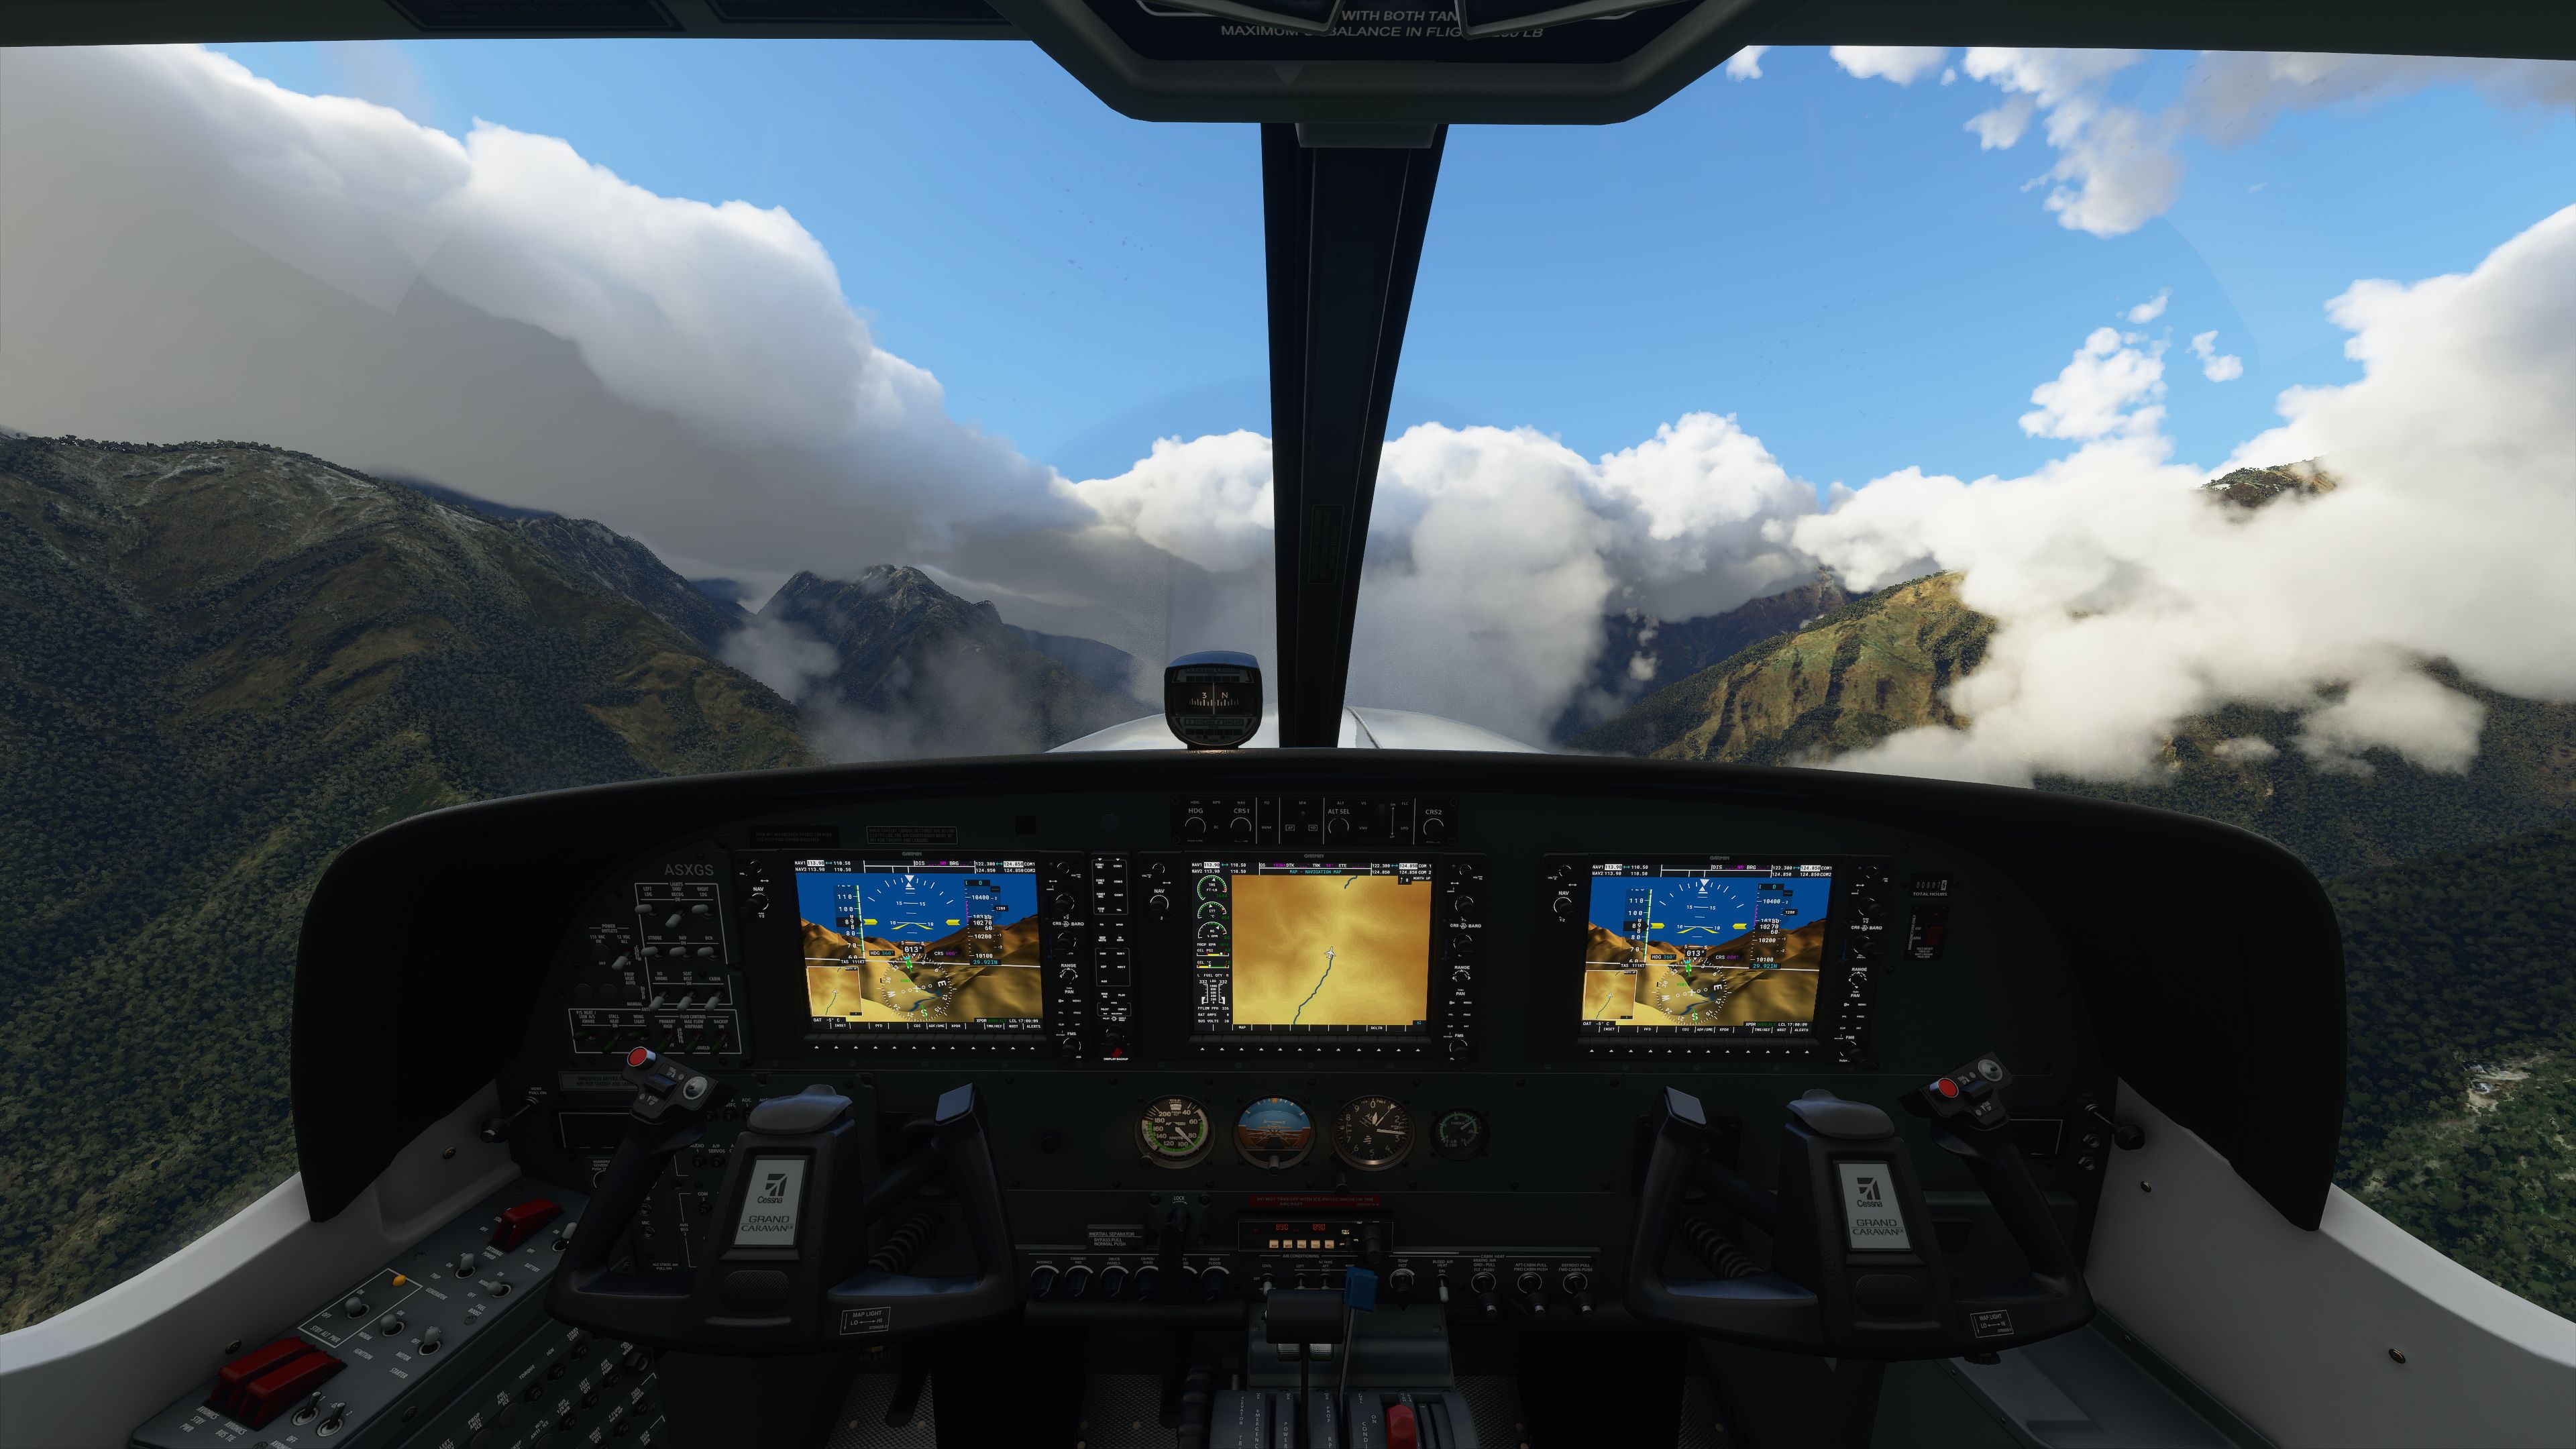 Microsoft Flight Simulator 2020 lets you take to the skies with  breathtaking realism